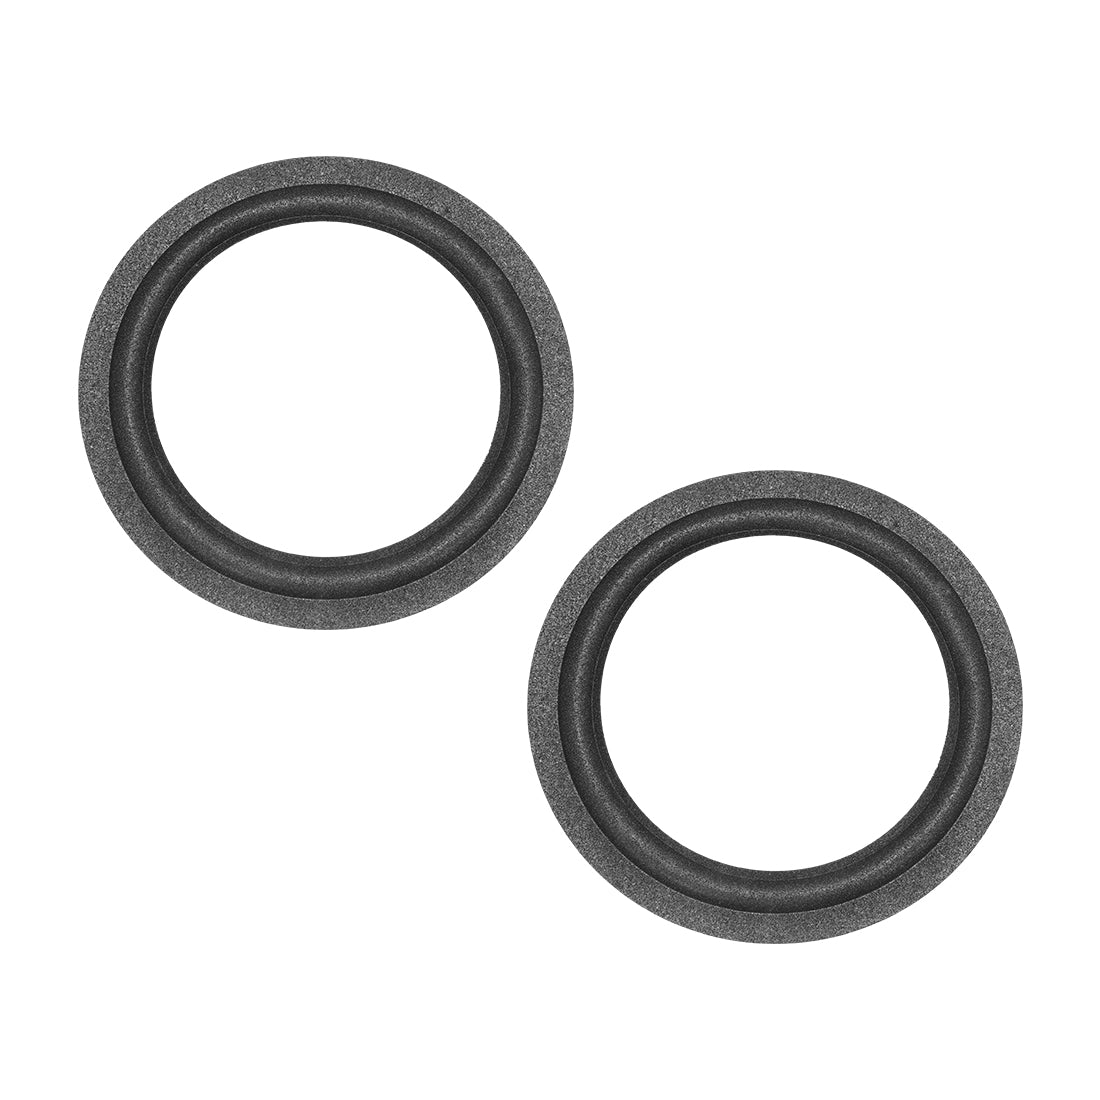 uxcell Uxcell 4.5" 4.5 inch Speaker Foam Edge Surround Rings Replacement Part for Speaker Repair or DIY 2pcs